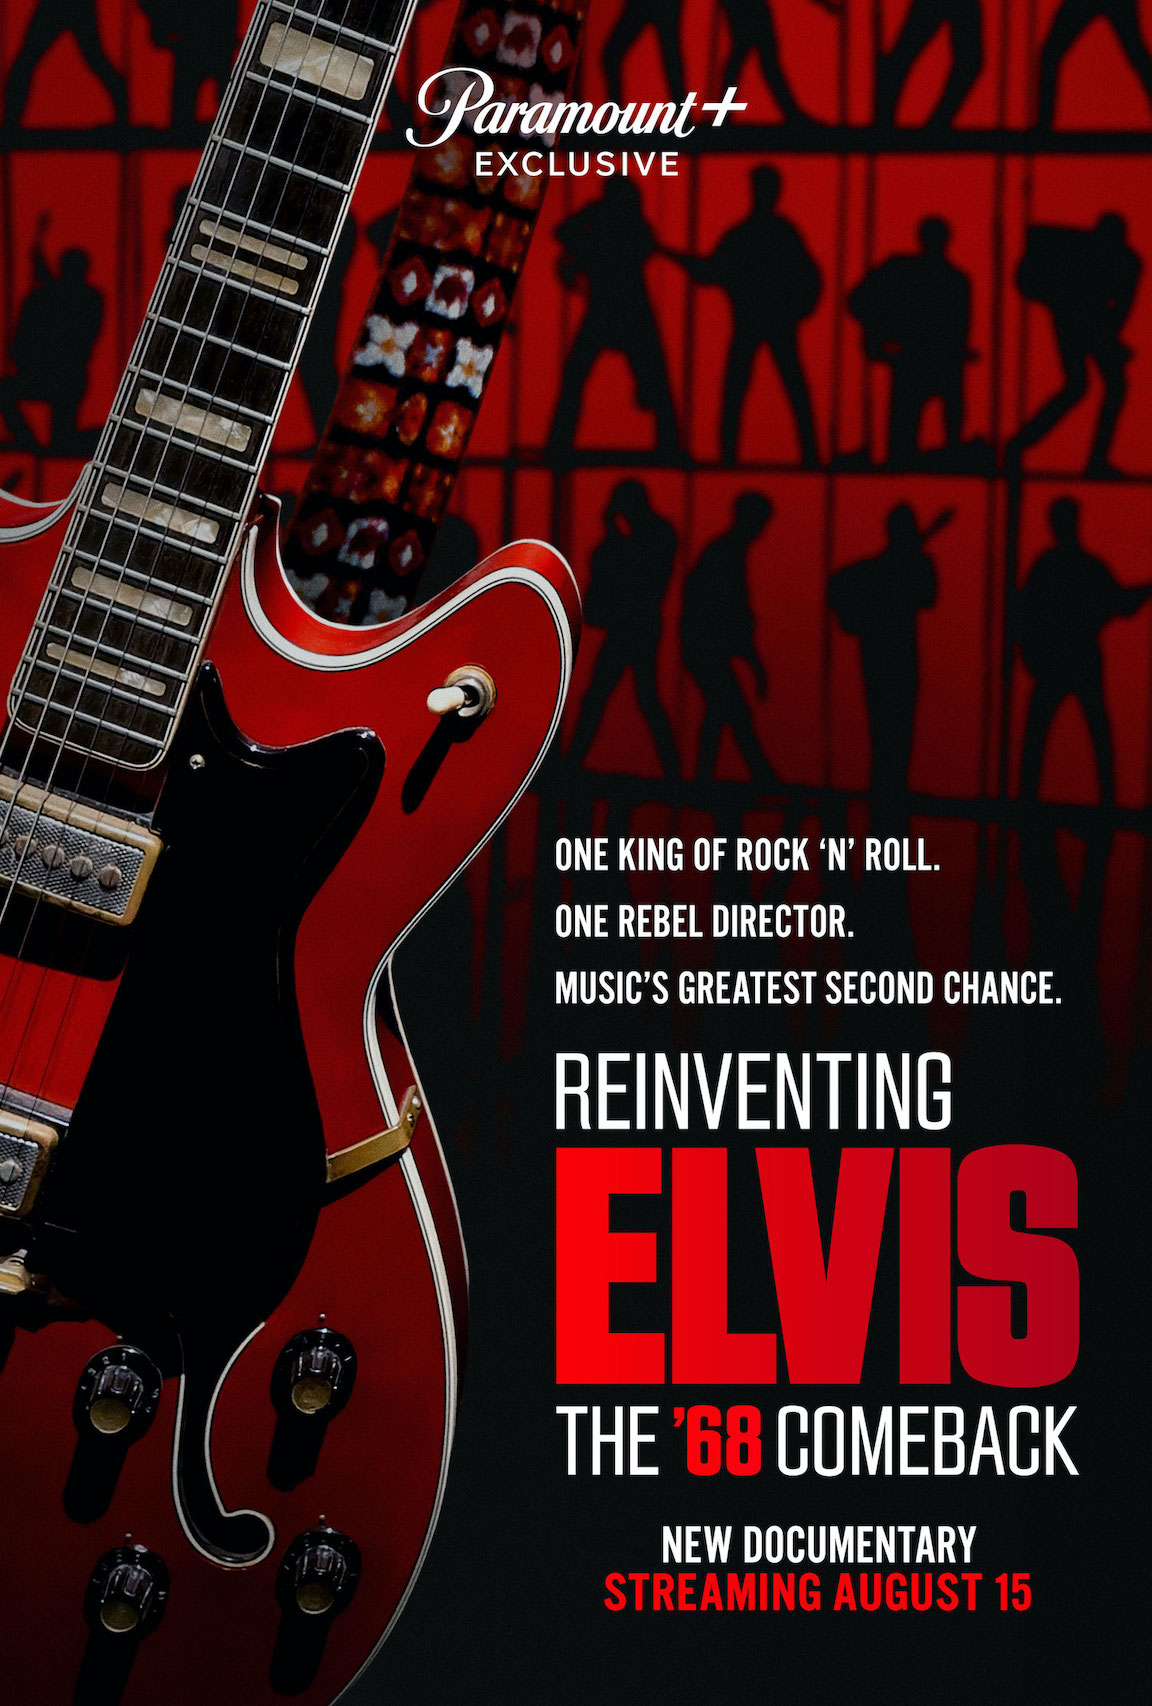 Key art for `Reinventing Elvis: The '68 Comeback,` streaming on Paramount+. (Image courtesy of Paramount PressExpress)